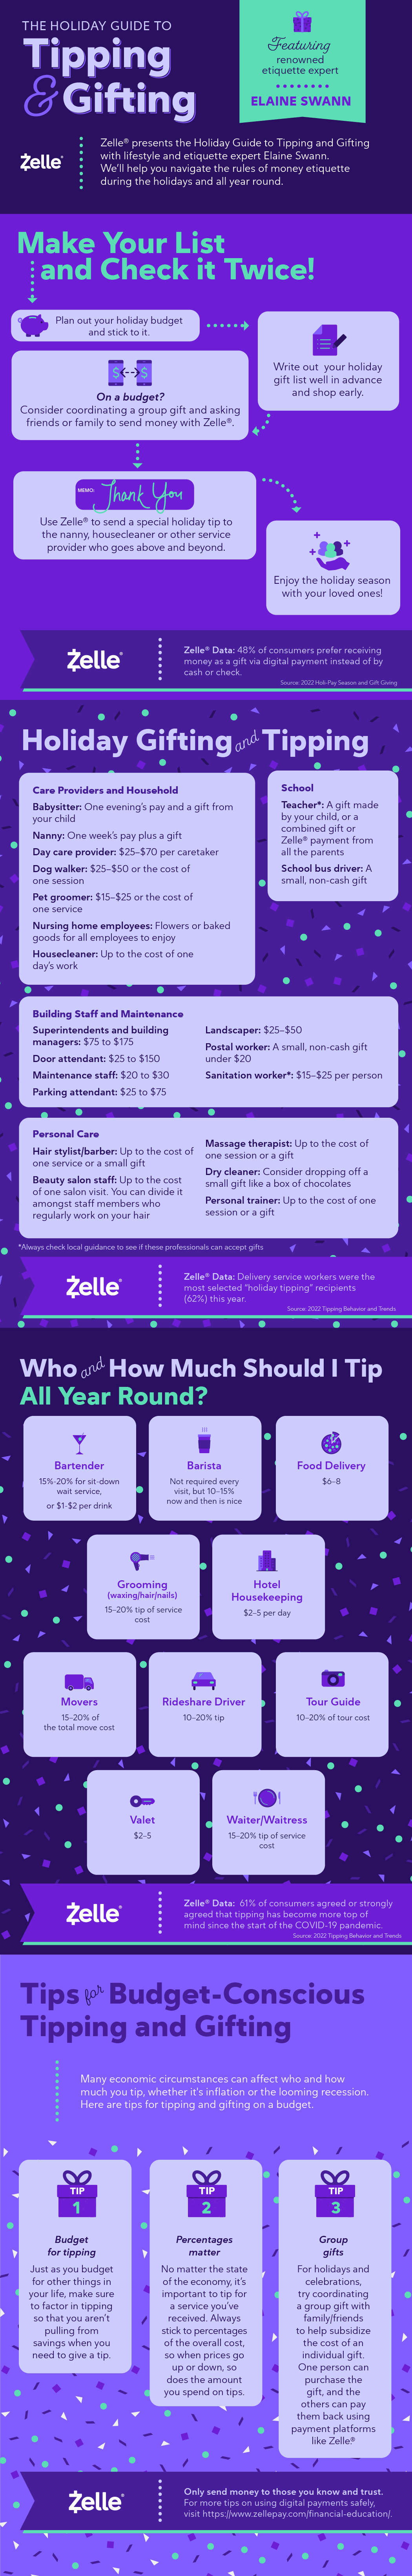 P2P_Usage_Holiday_Tipping_Gifting_Infographic_Q422